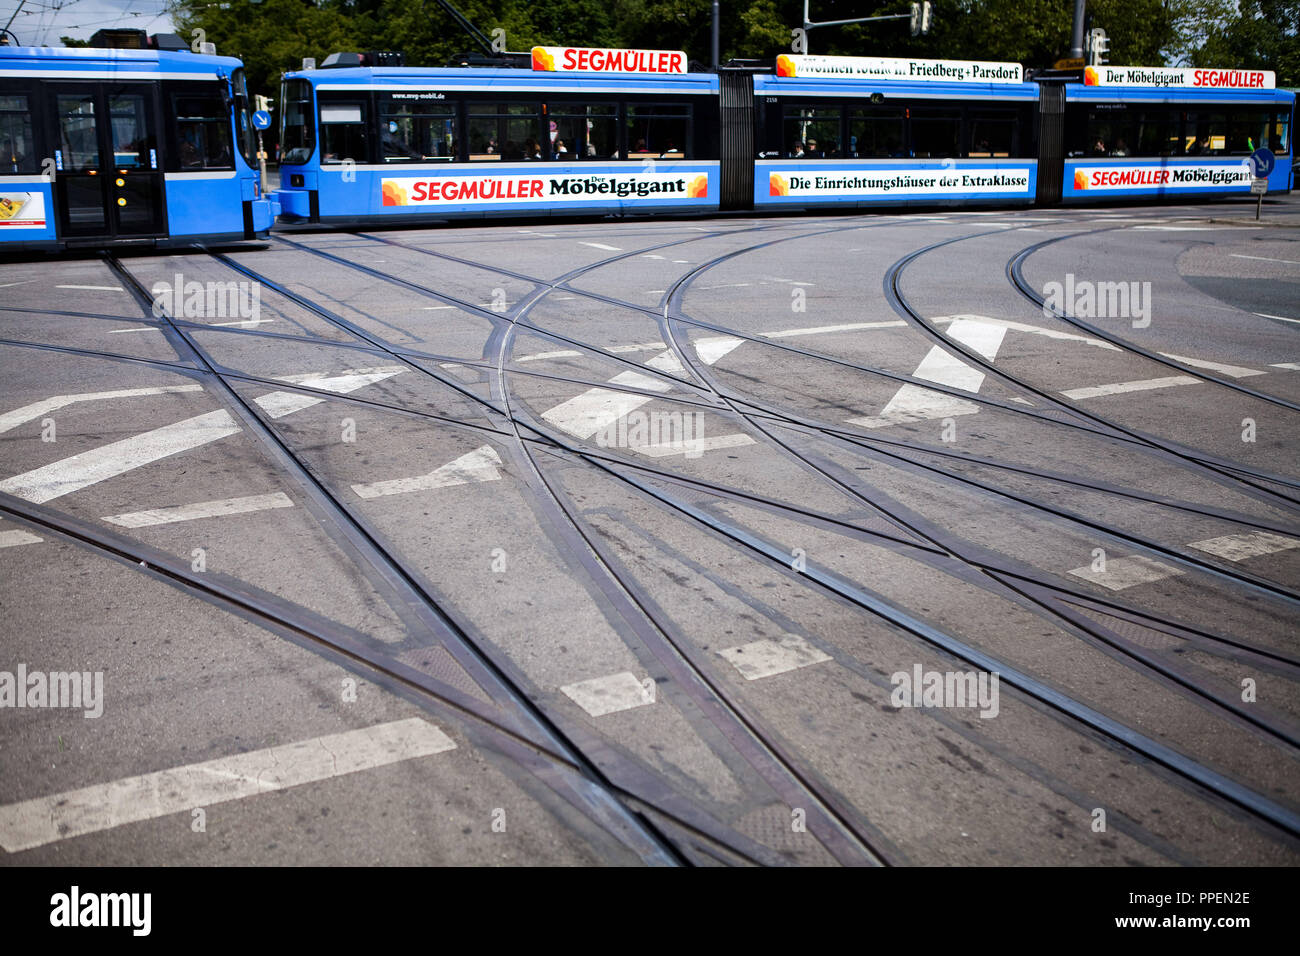 Two trams cross the Leonrodplatz in Munich. Planners of 'Arbeitskreis Attraktiver Nahverkehr' (AAN) (Working group for improving local traffic) want to connect the tram lines in the city. Stock Photo